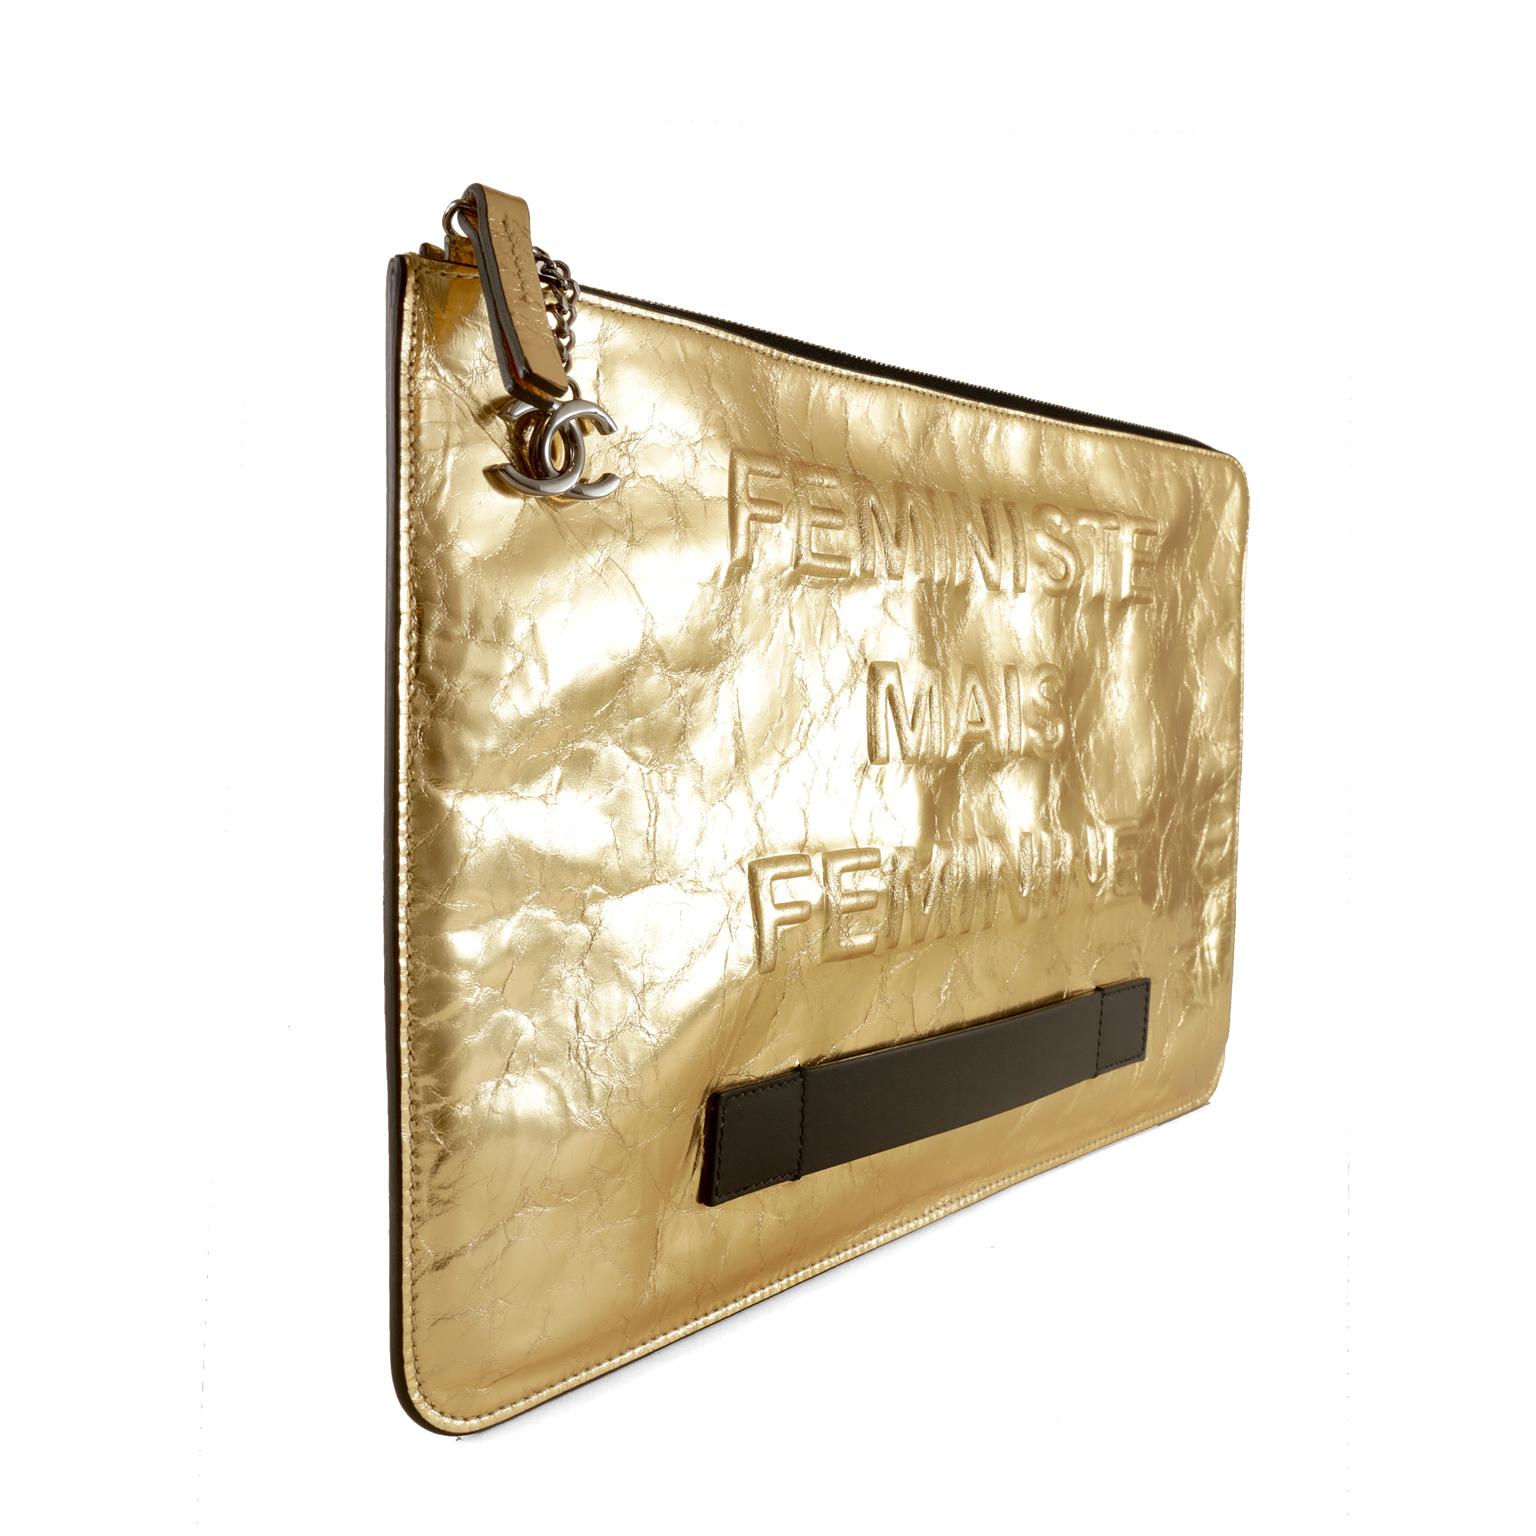 Chanel Gold Foil Feministe Mais Feminine Folio Clutch- pristine condition
From the Spring Summer 2015 collection, this spirited piece says, “I’m a feminist, but feminine.”
Extra large gold metallic leather clutch has an intentionally distressed foil